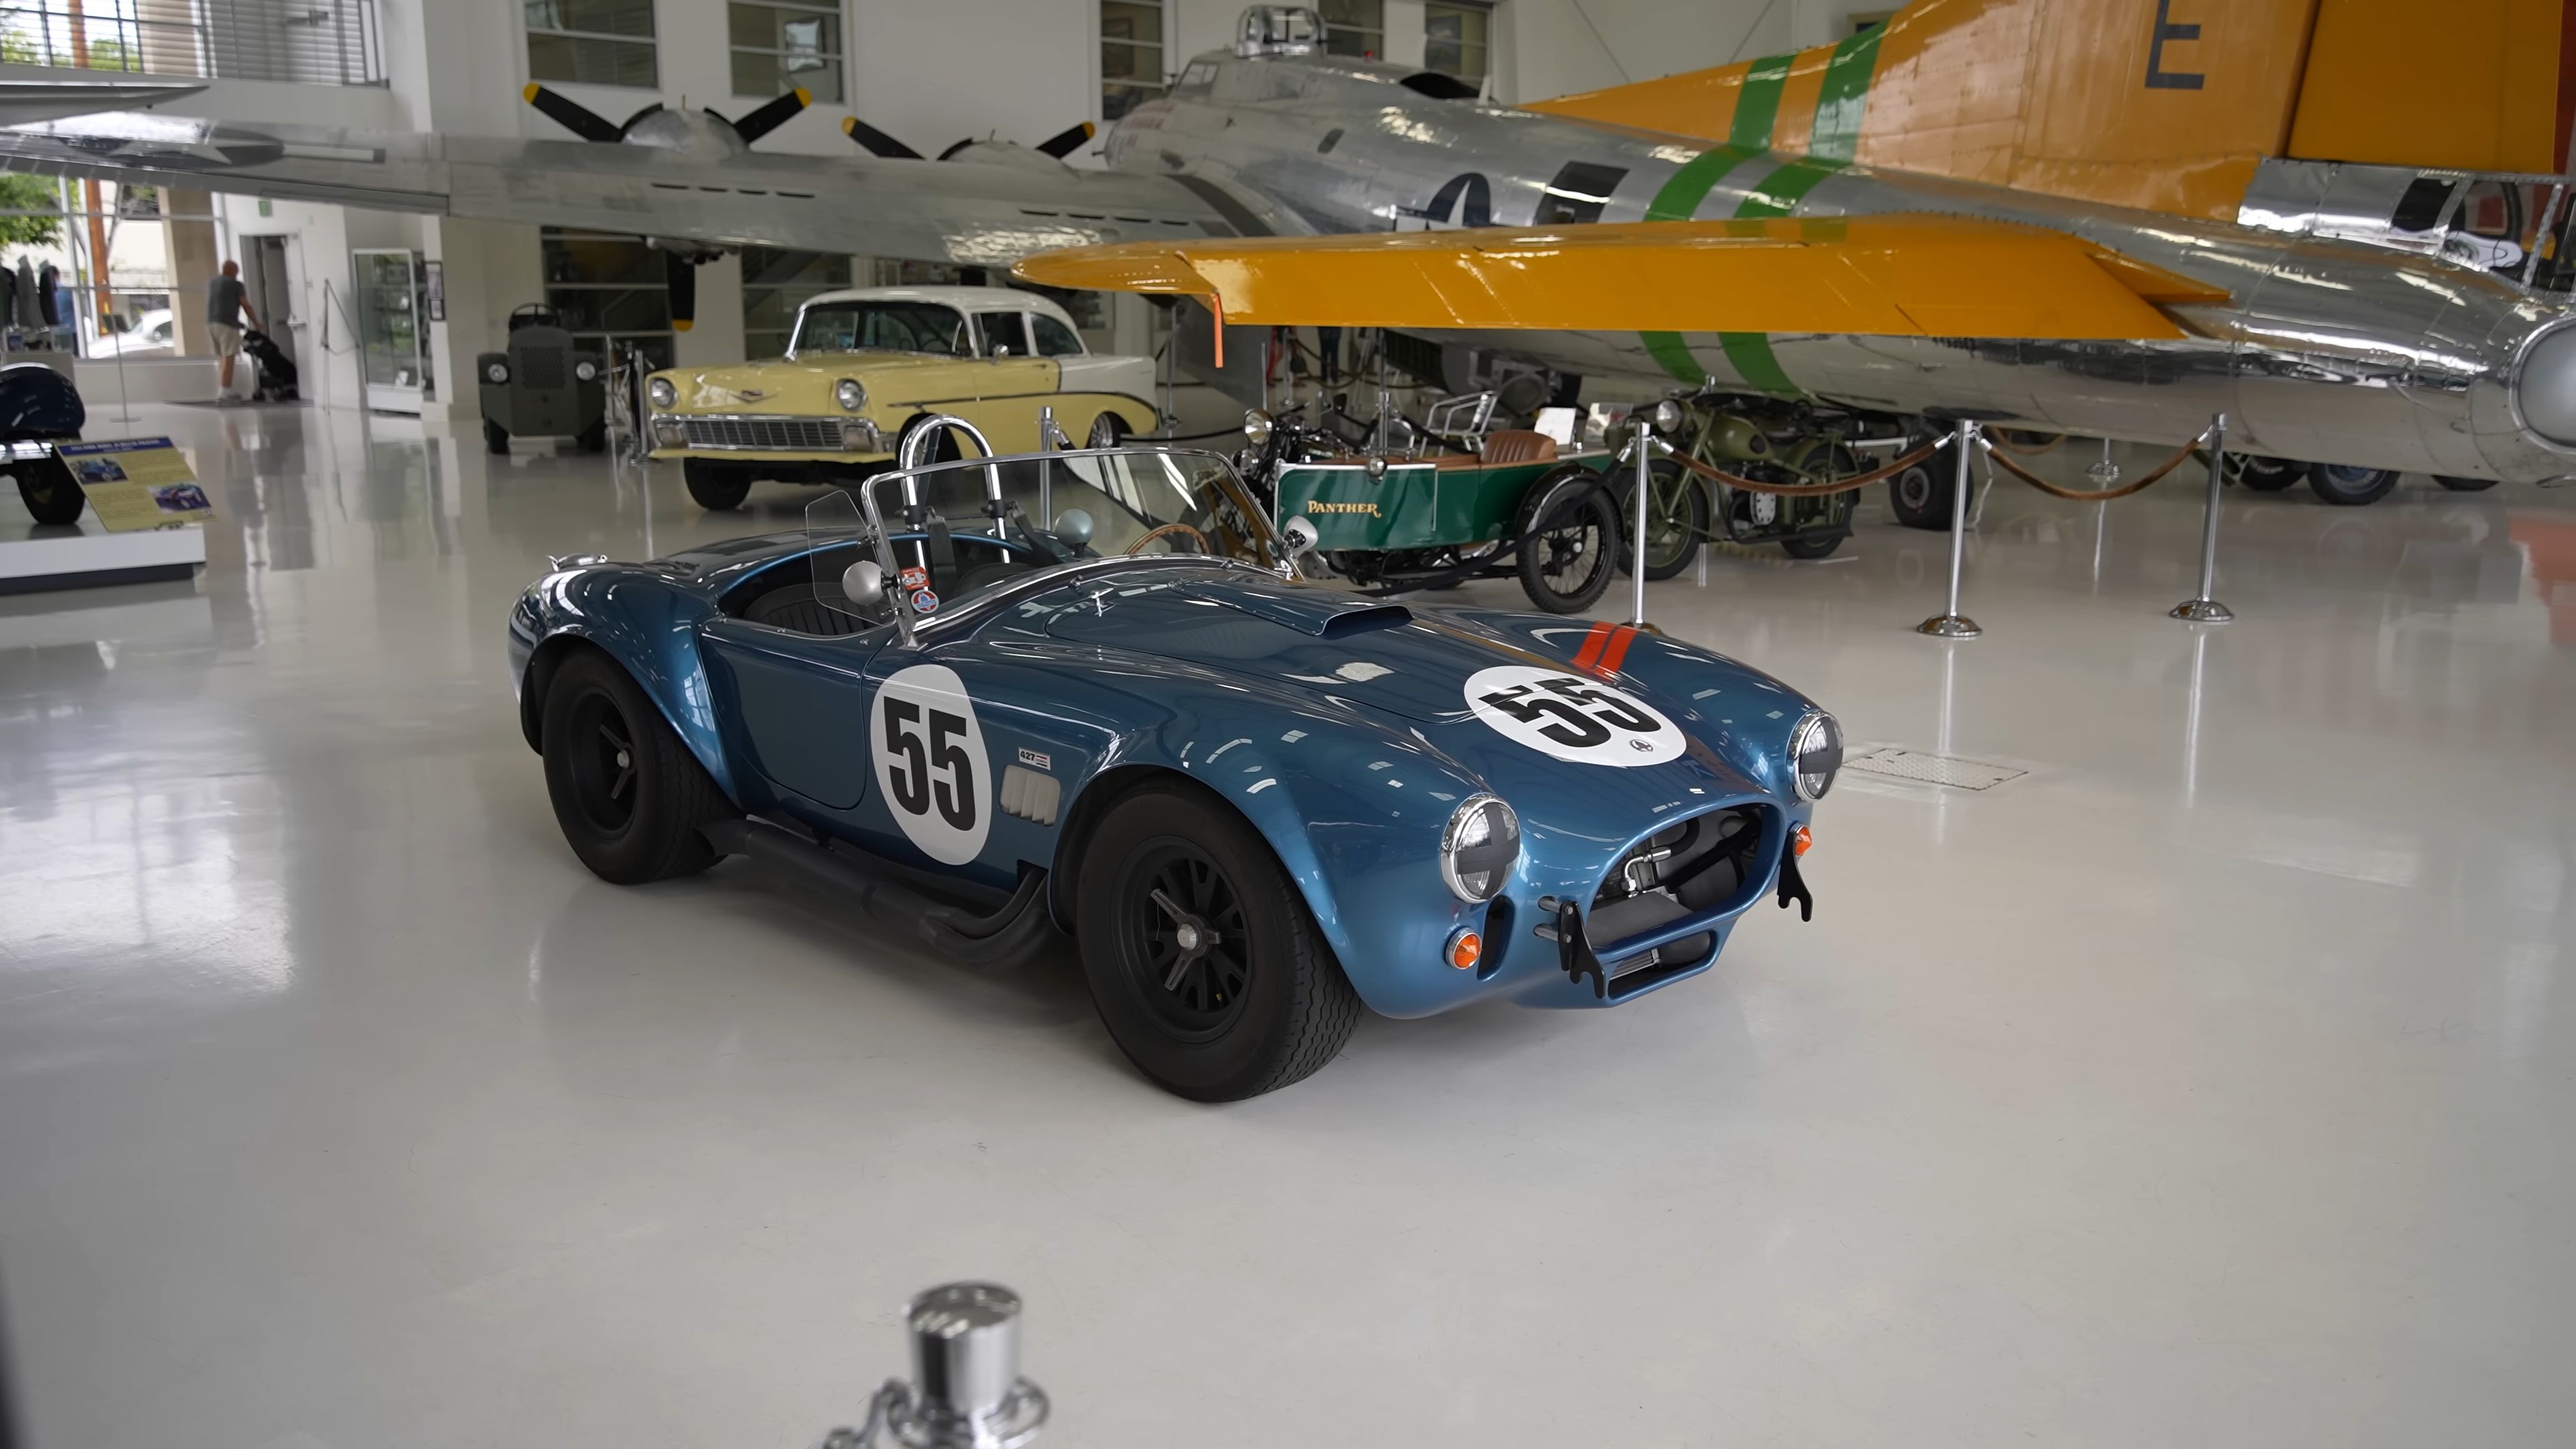 2022 This Shelby Cobra Replica Is So Good, You Can't Tell It Apart from